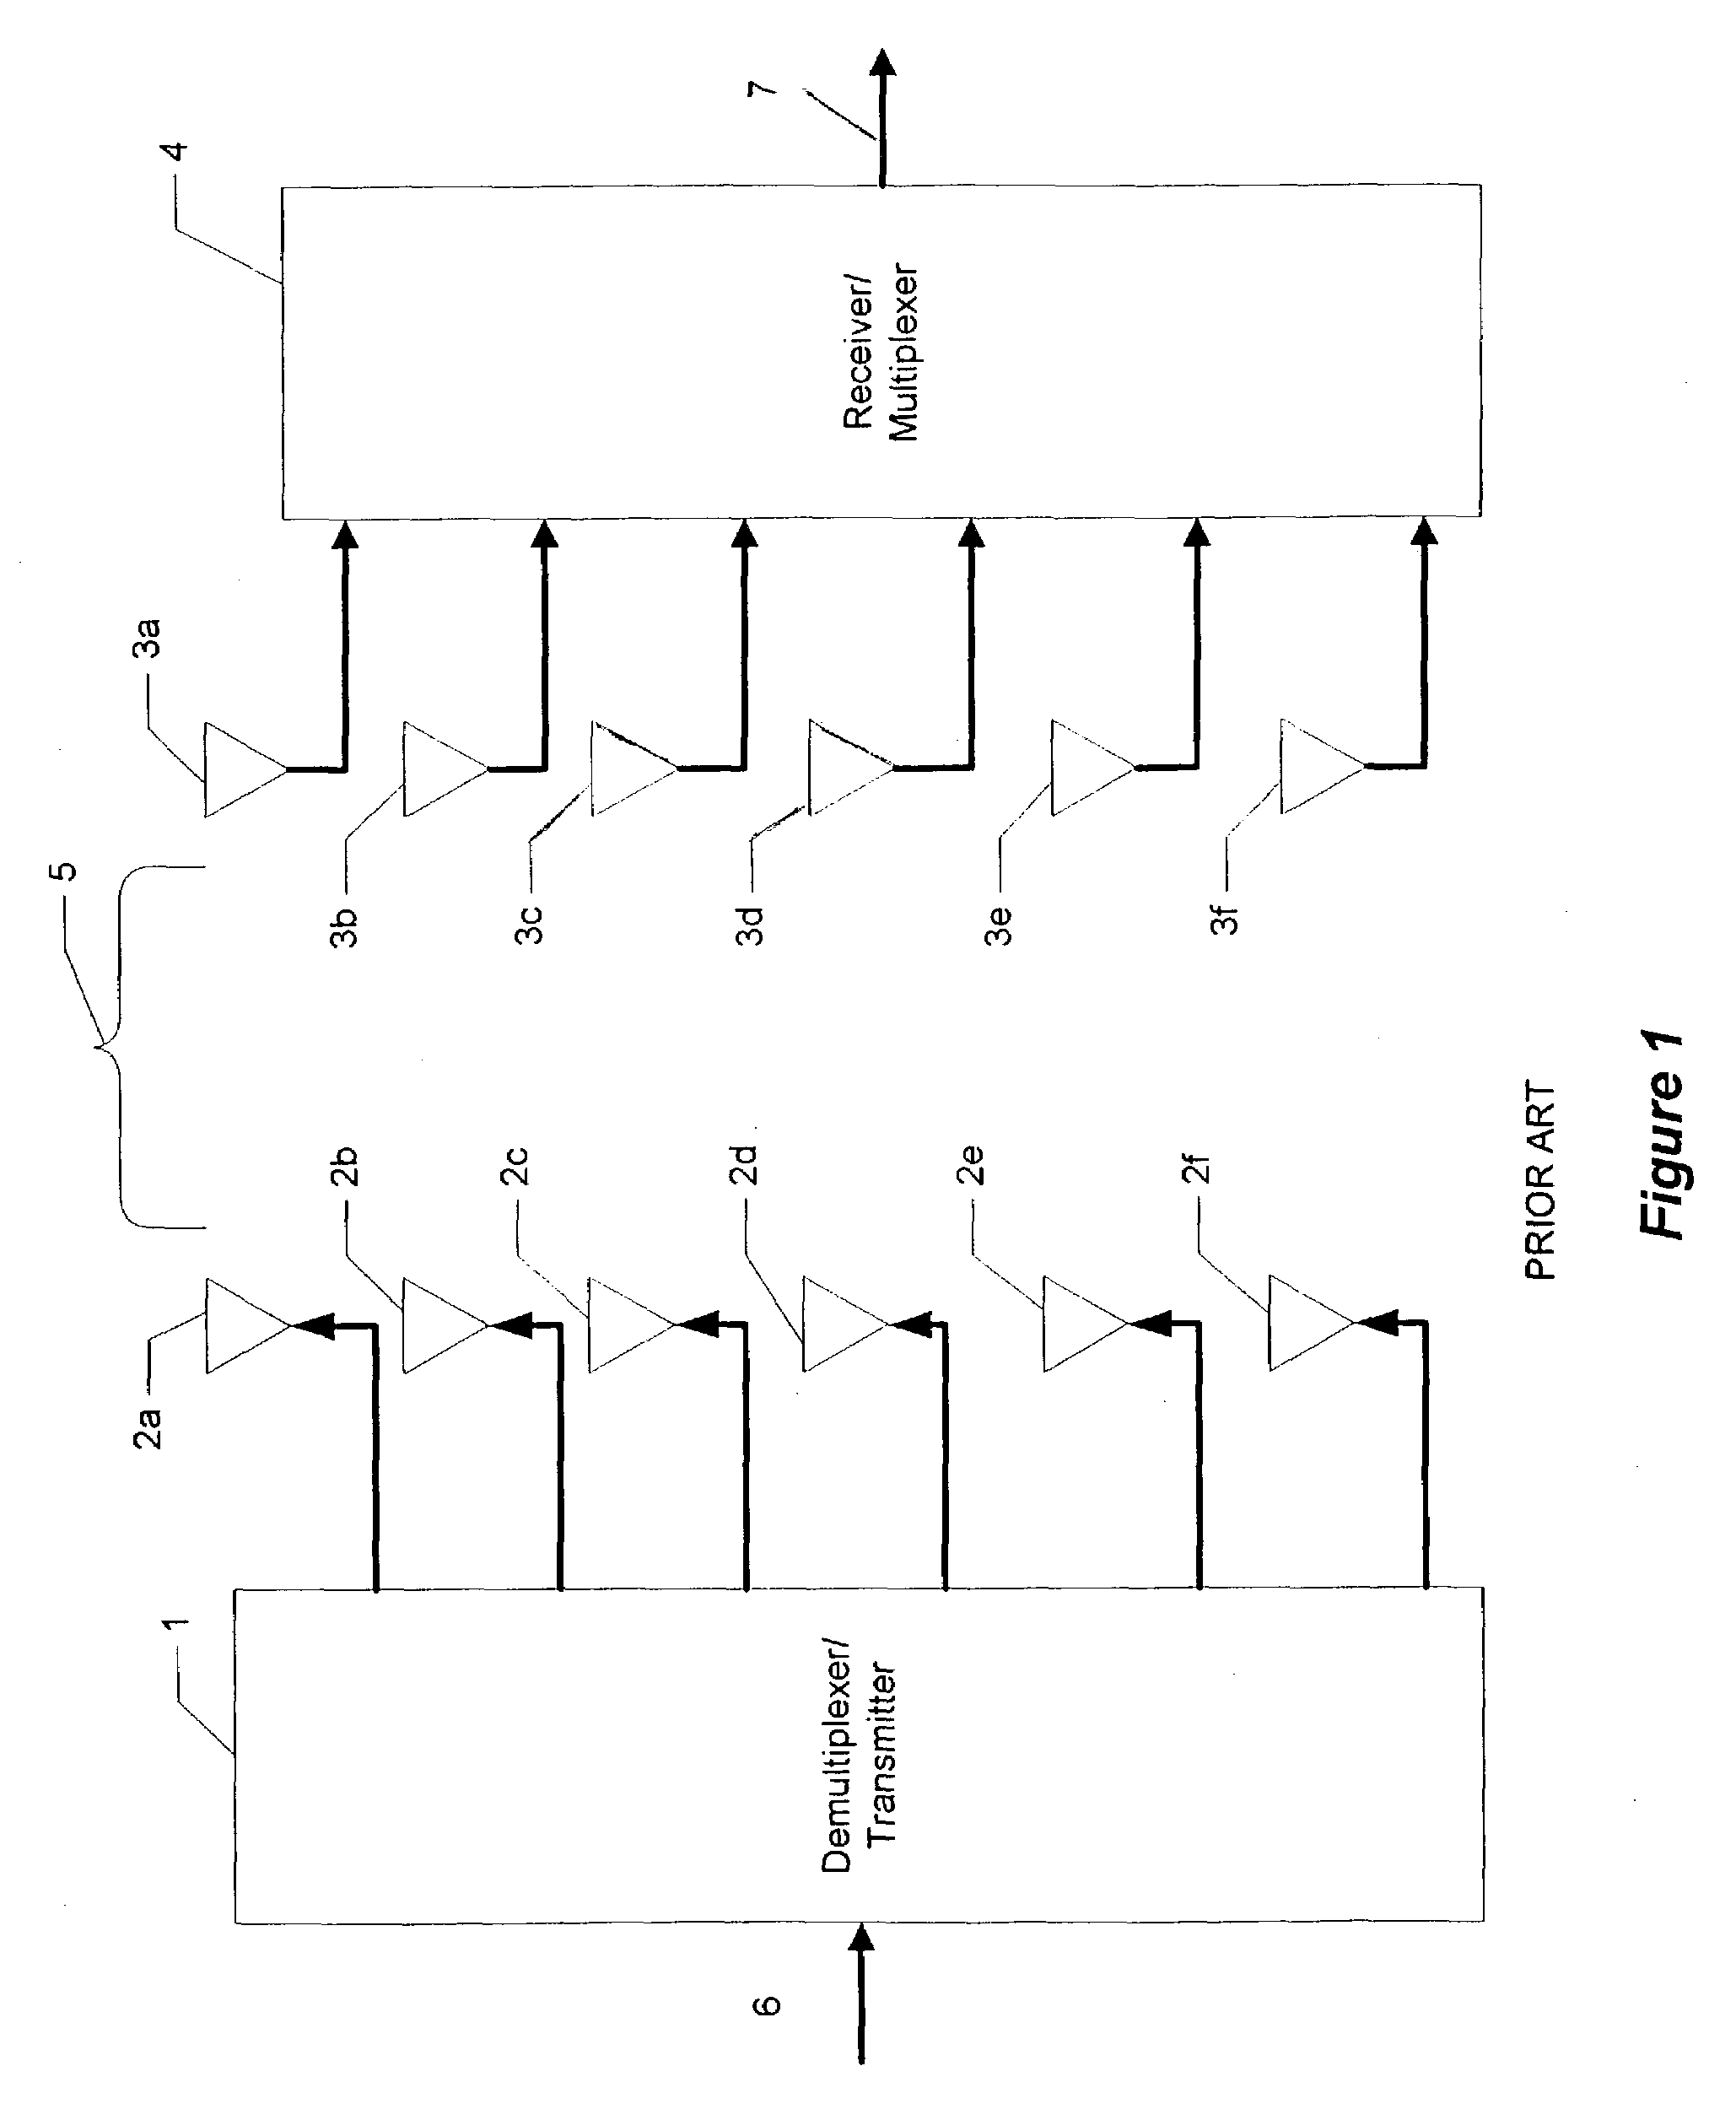 Method of selecting receive antennas for MIMO systems